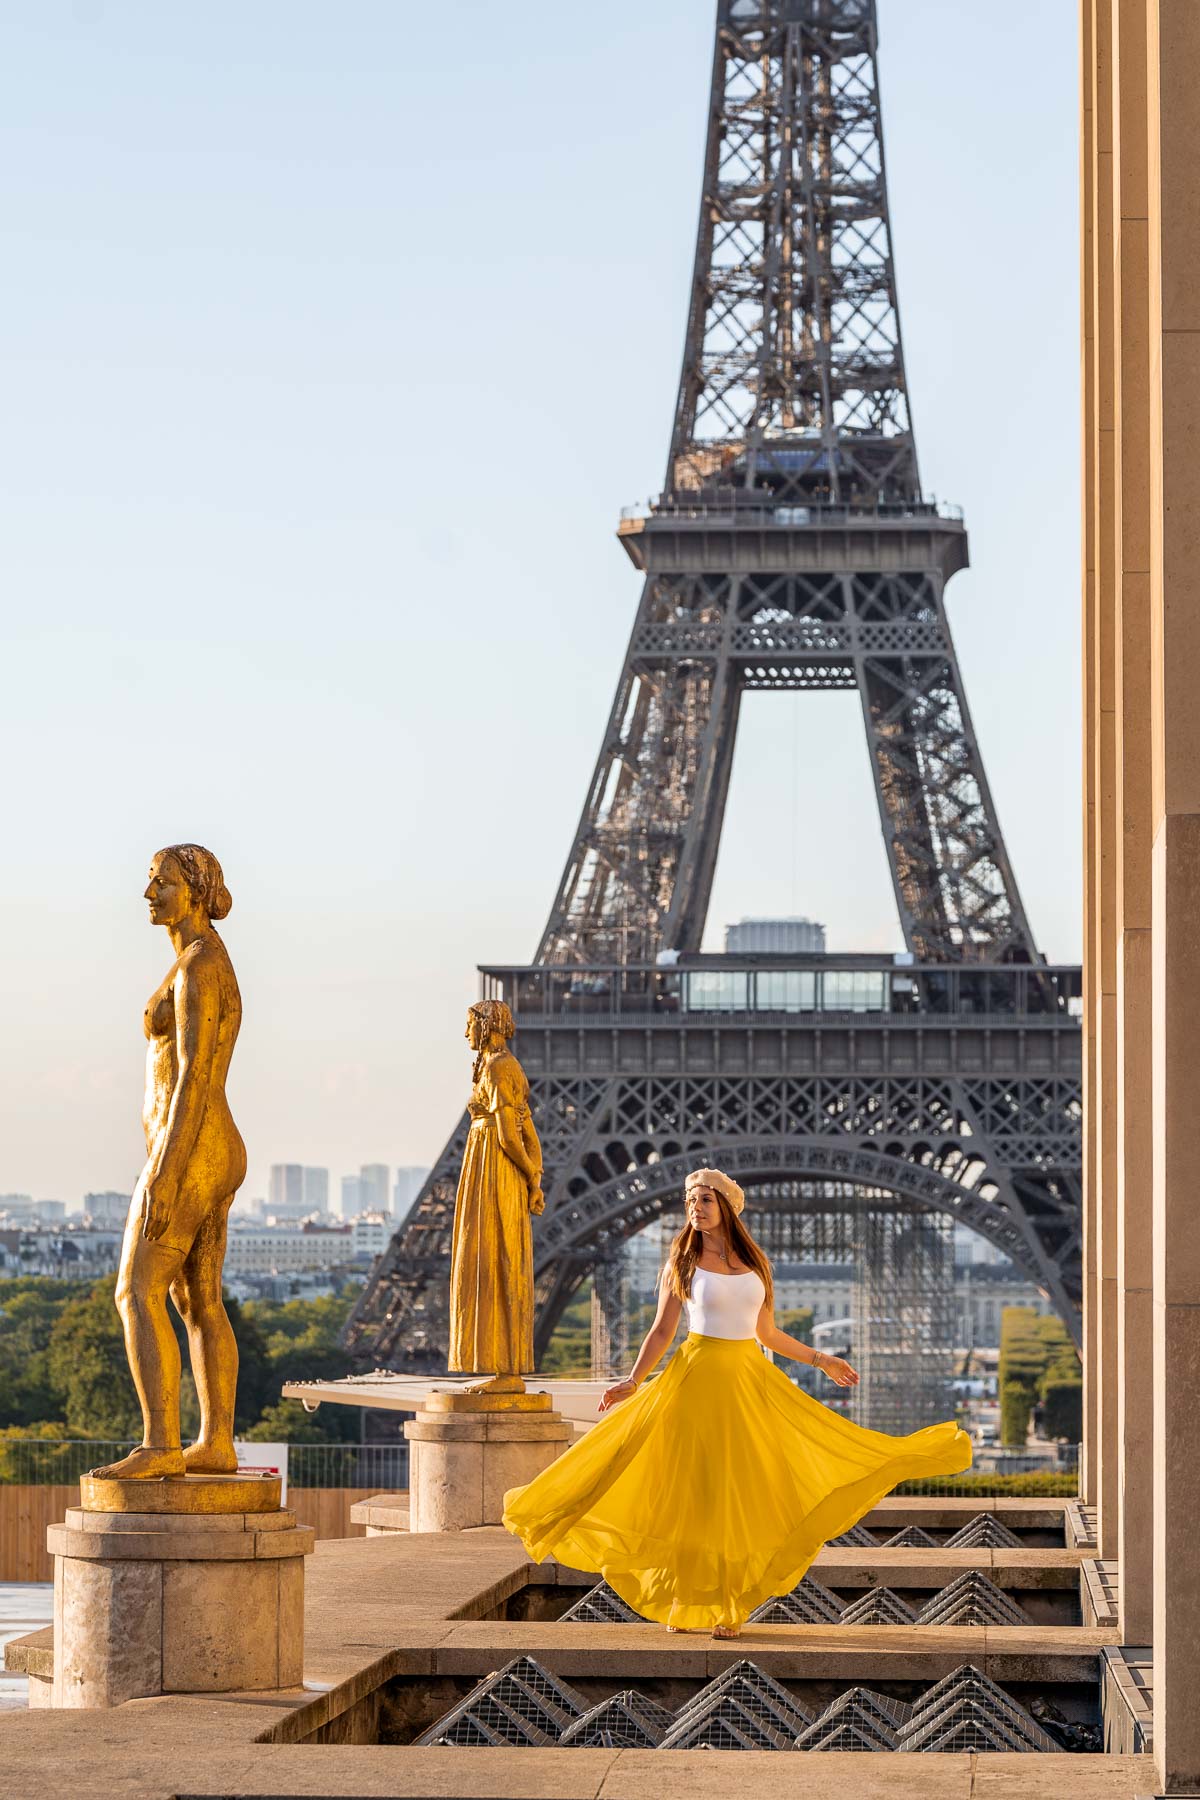 Girl in a yellow dress twirling in front of the Eiffel Tower at Trocadero, one of the most instagrammable places in Paris